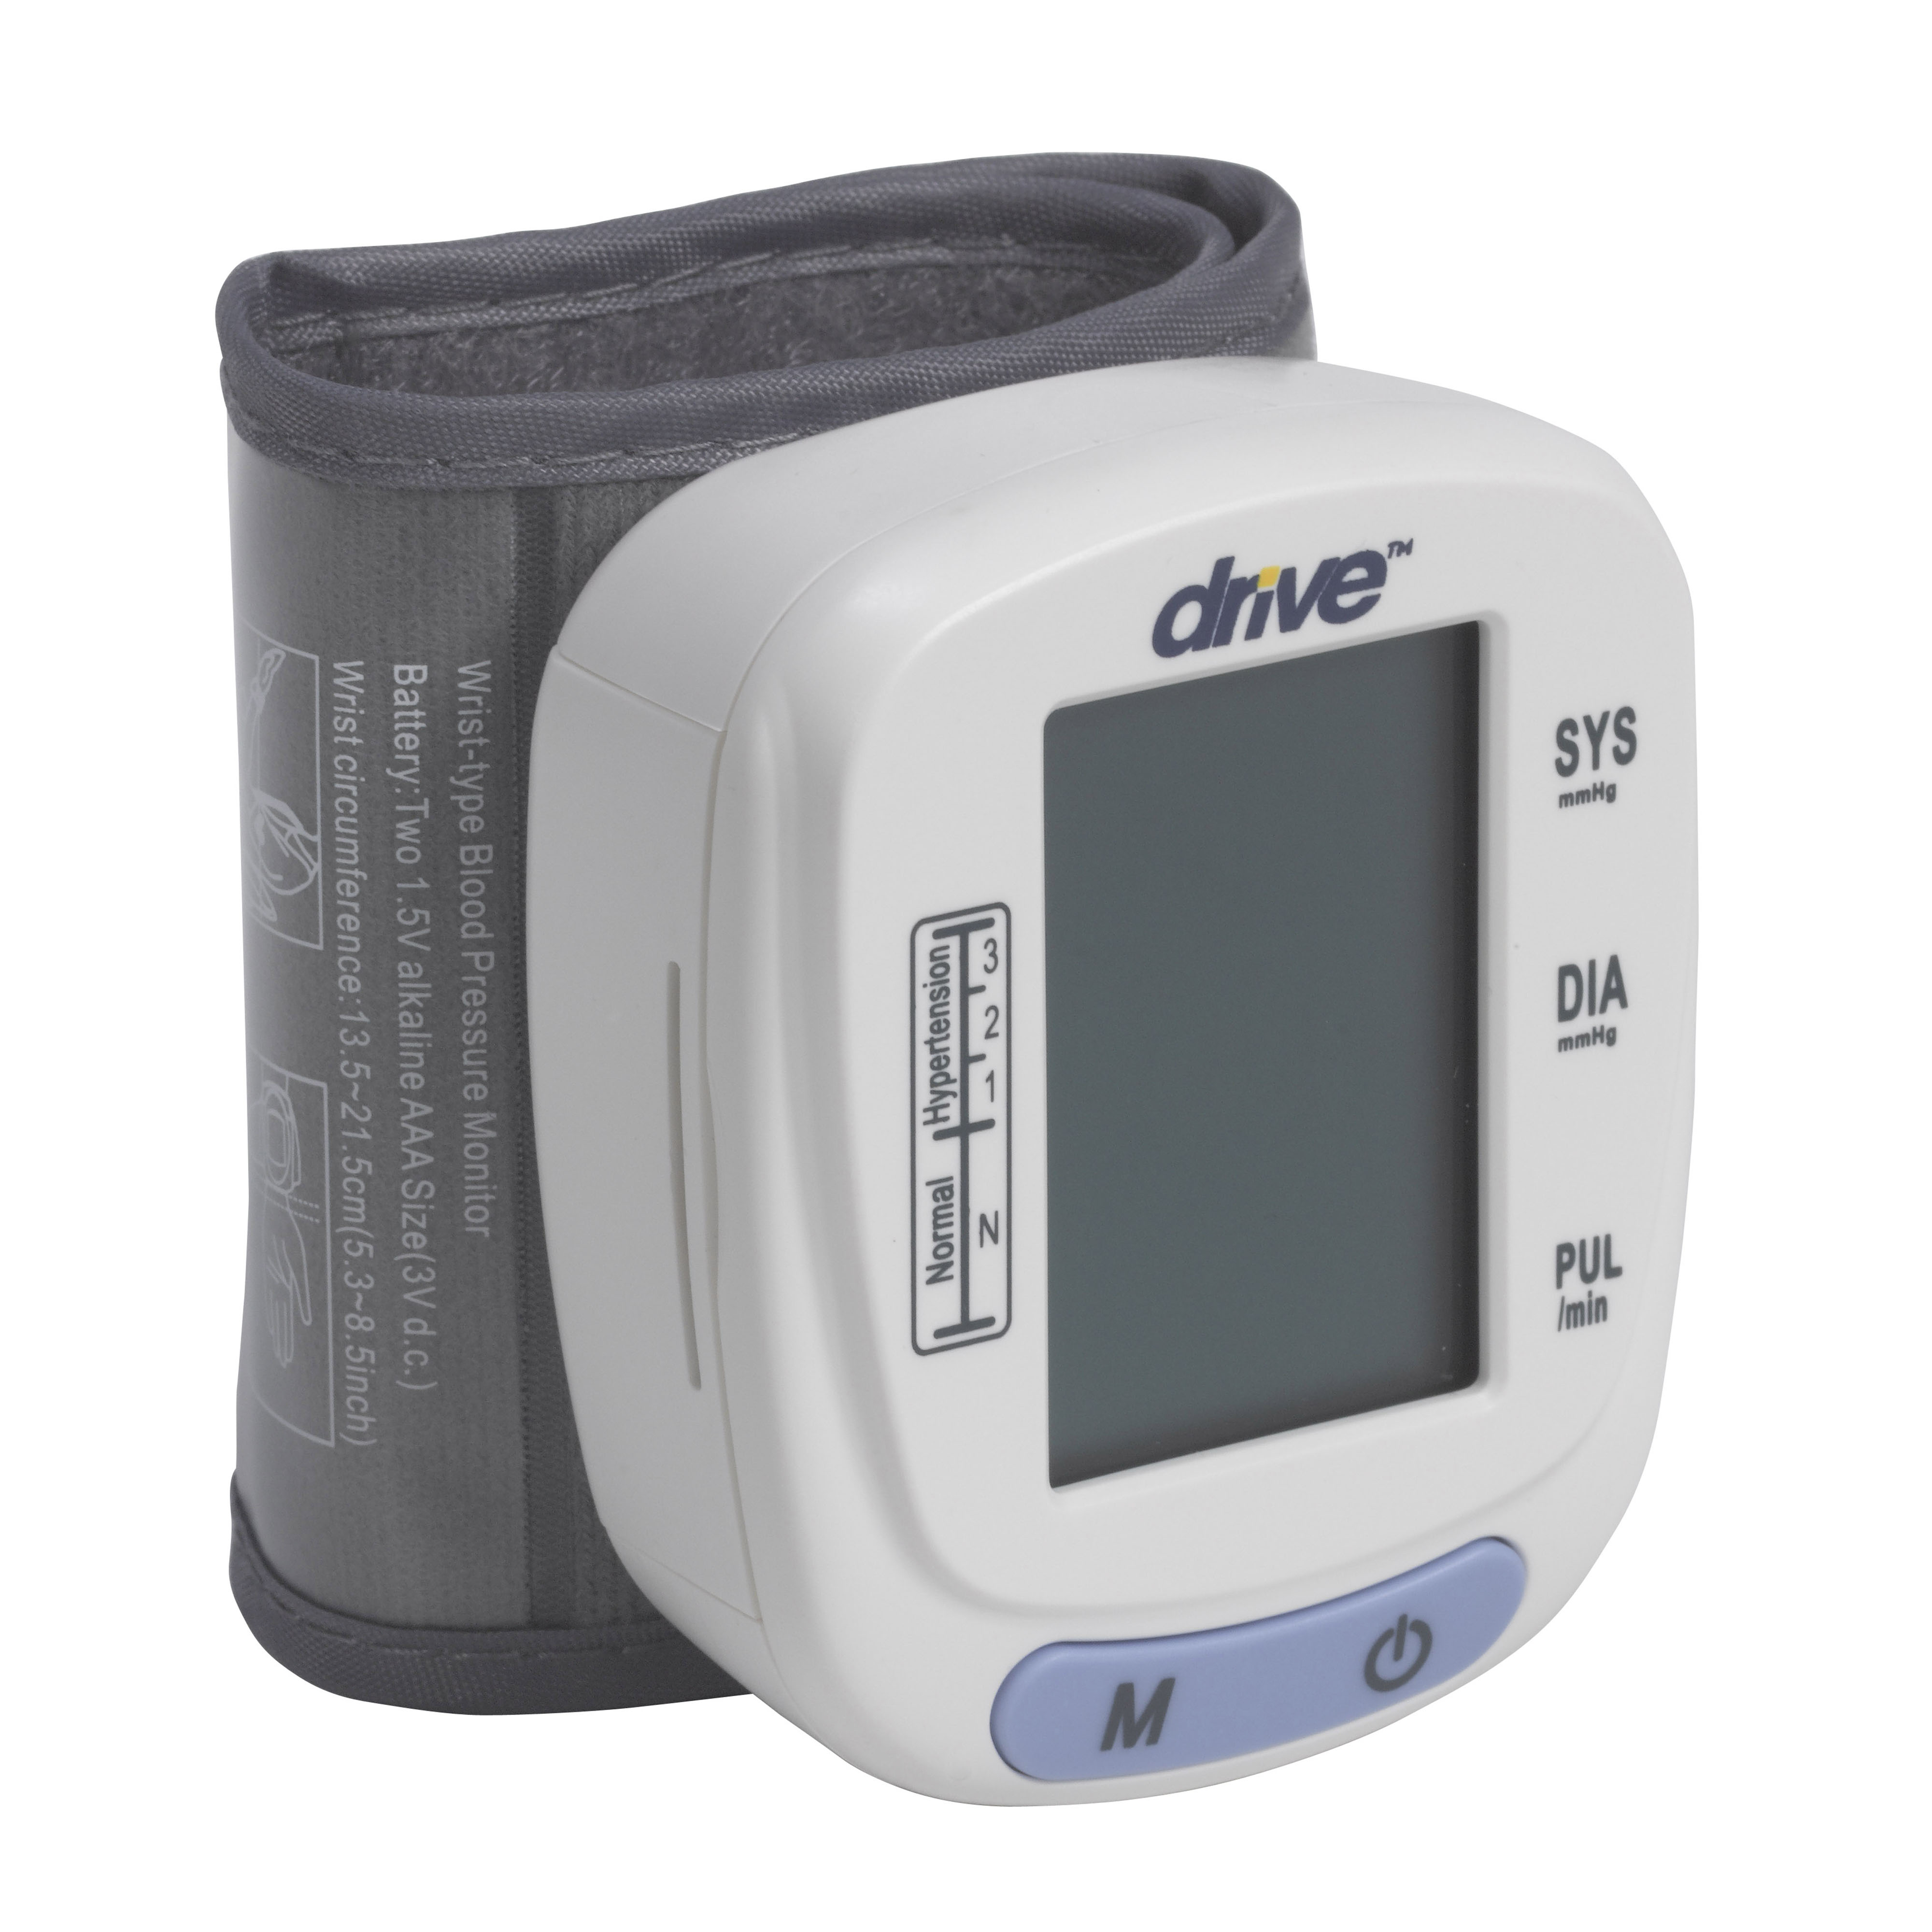 Drive Medical Automatic Blood Pressure Monitor, Wrist Model - image 2 of 7